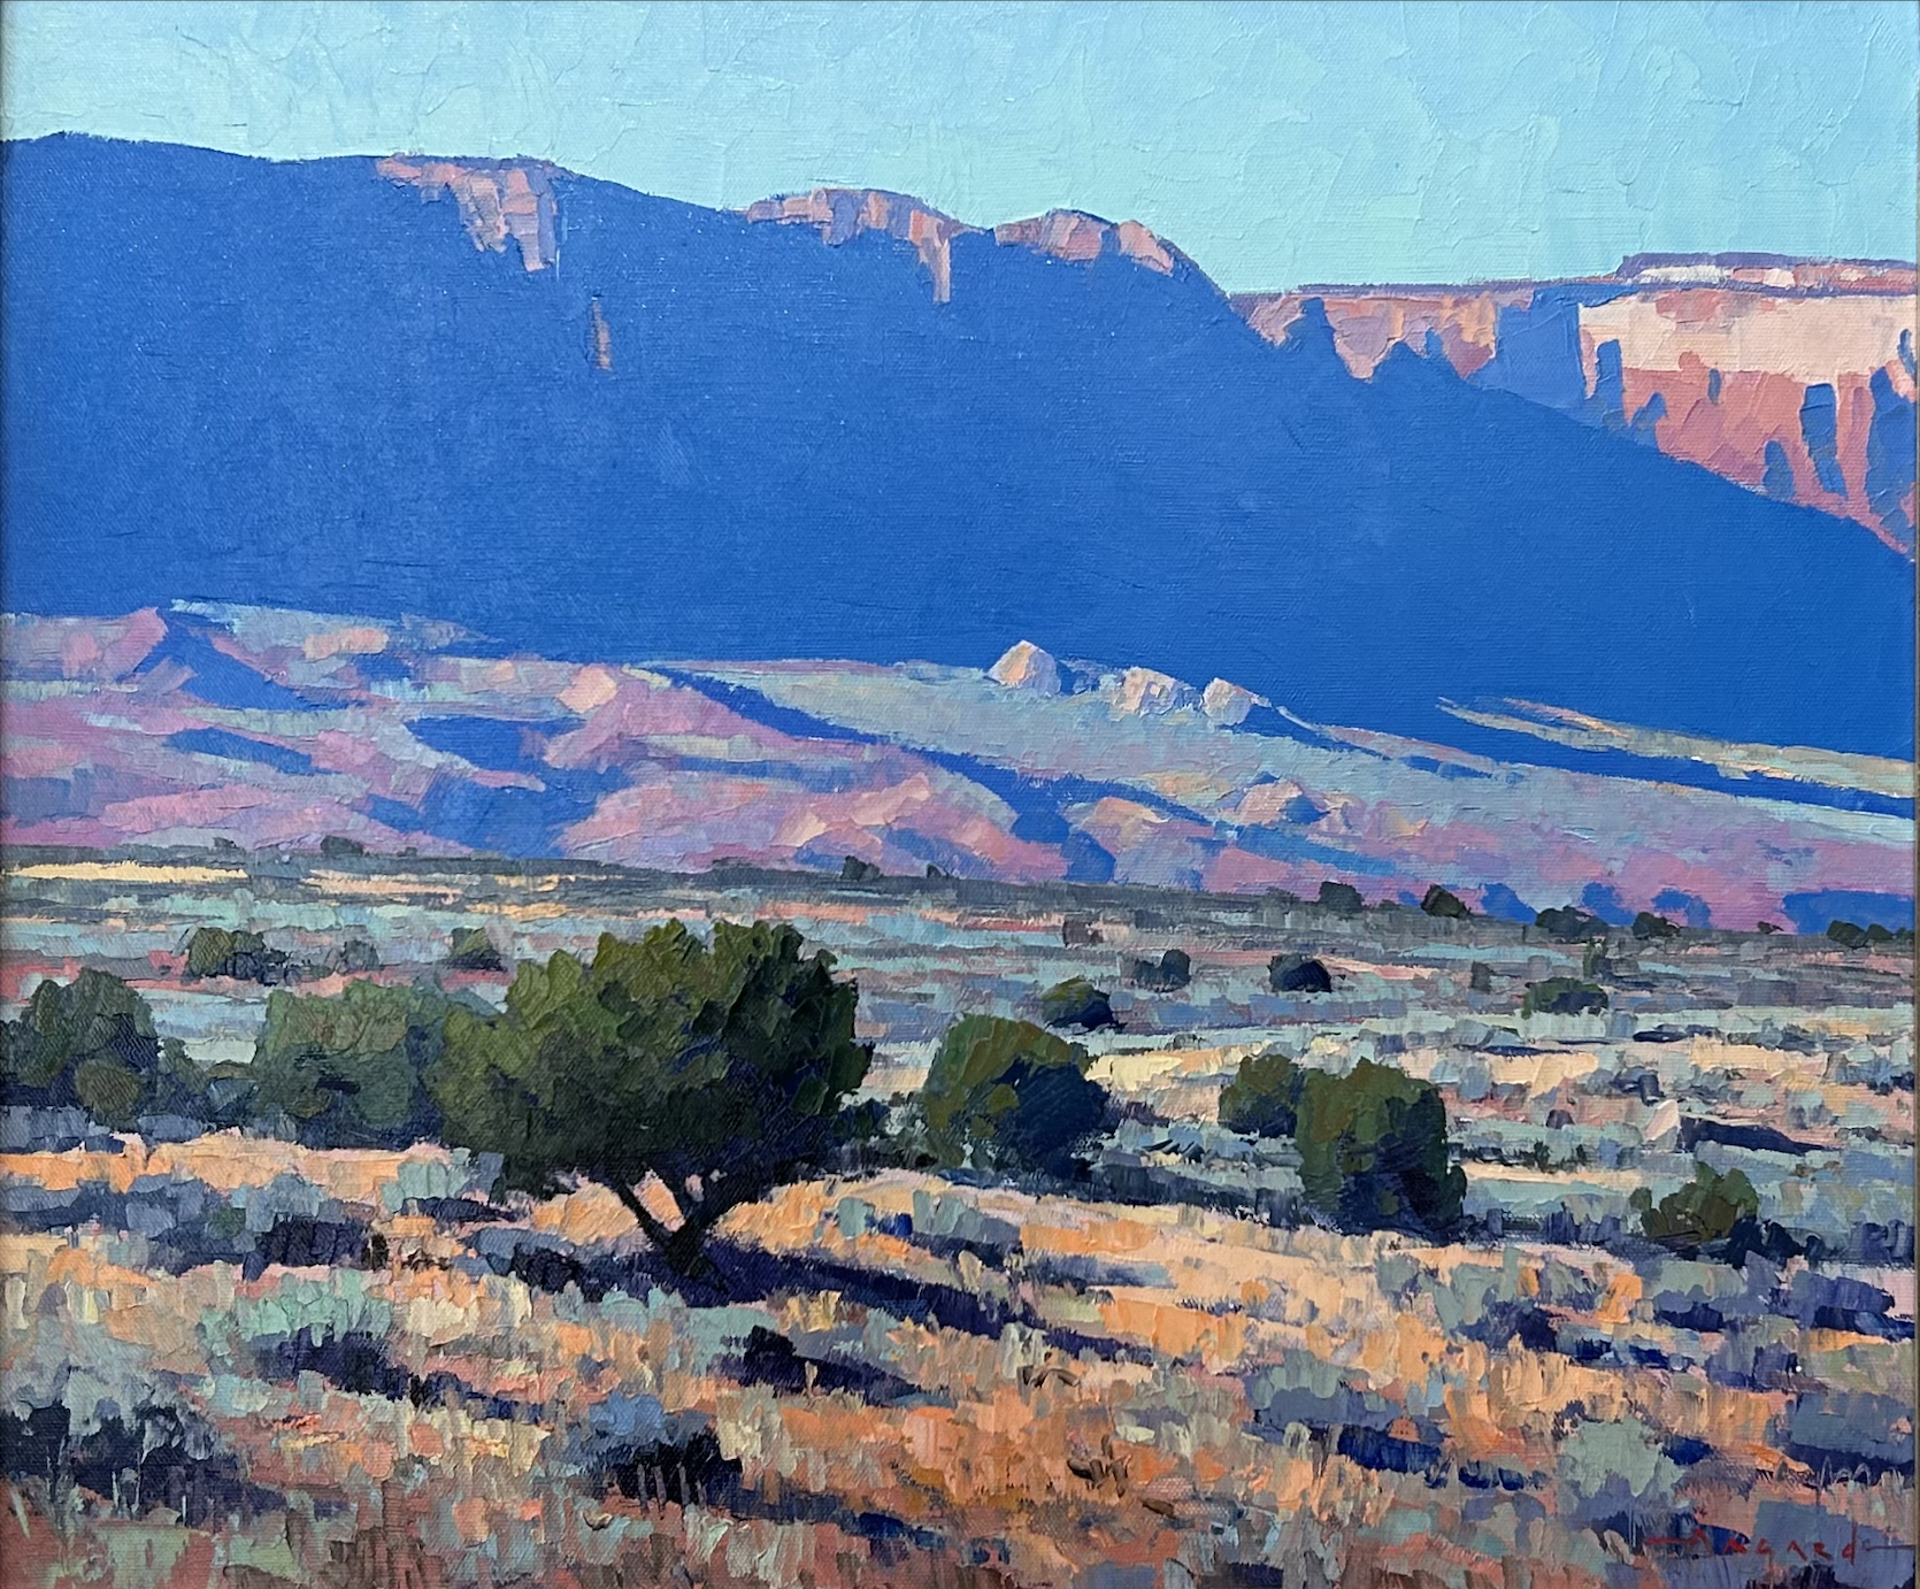 Other Side of the Canyon by Douglas Aagard